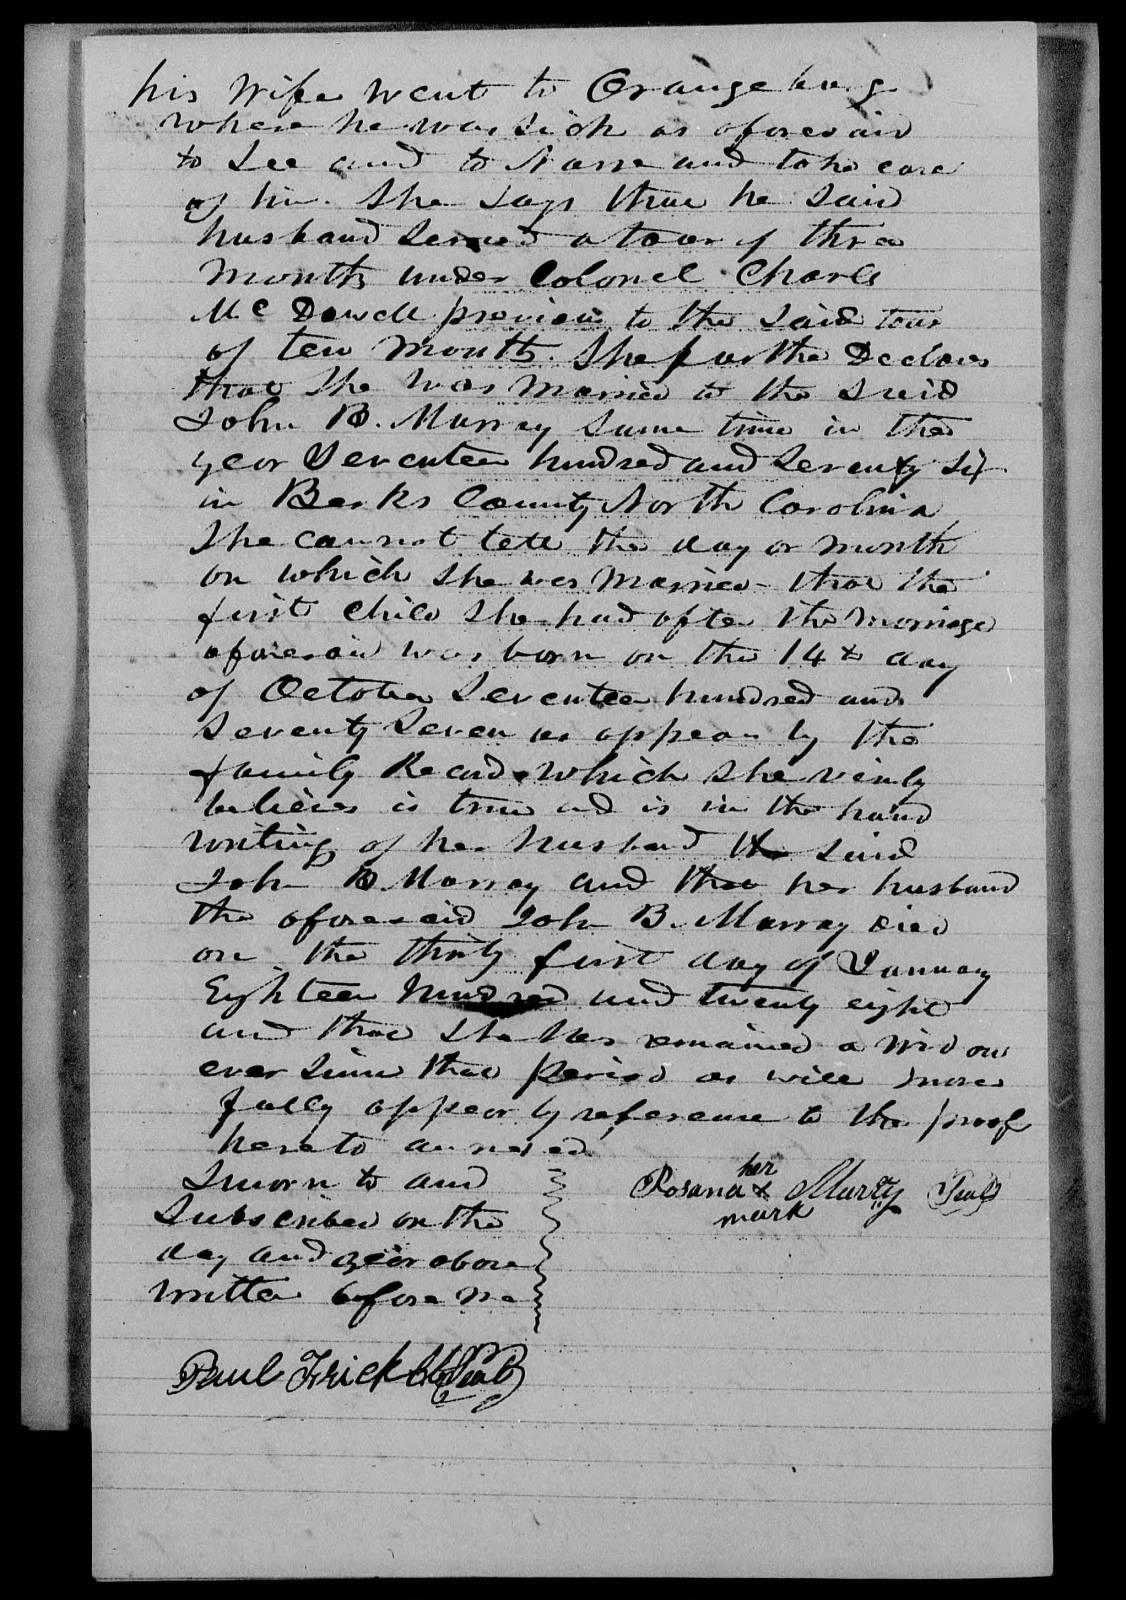 Application for a Widow's Pension from Rosana Murray, 30 October 1842, page 2